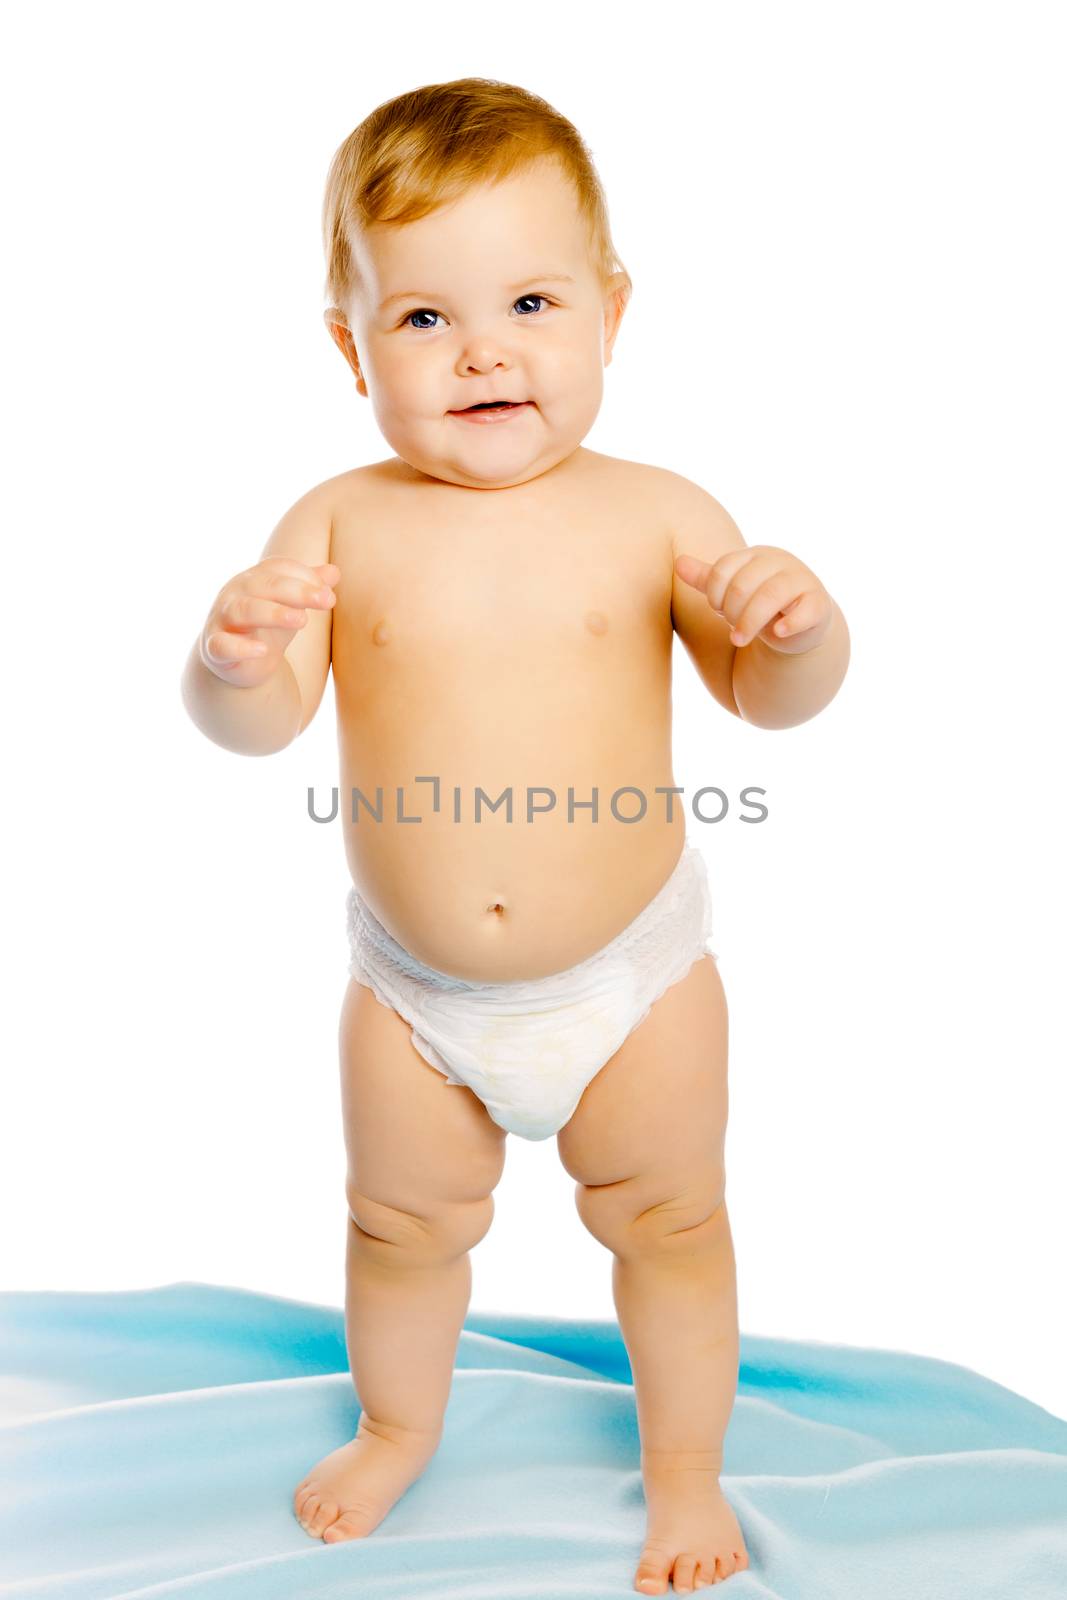 Funny baby in diaper standing on a blue blanket. Studio. Isolated